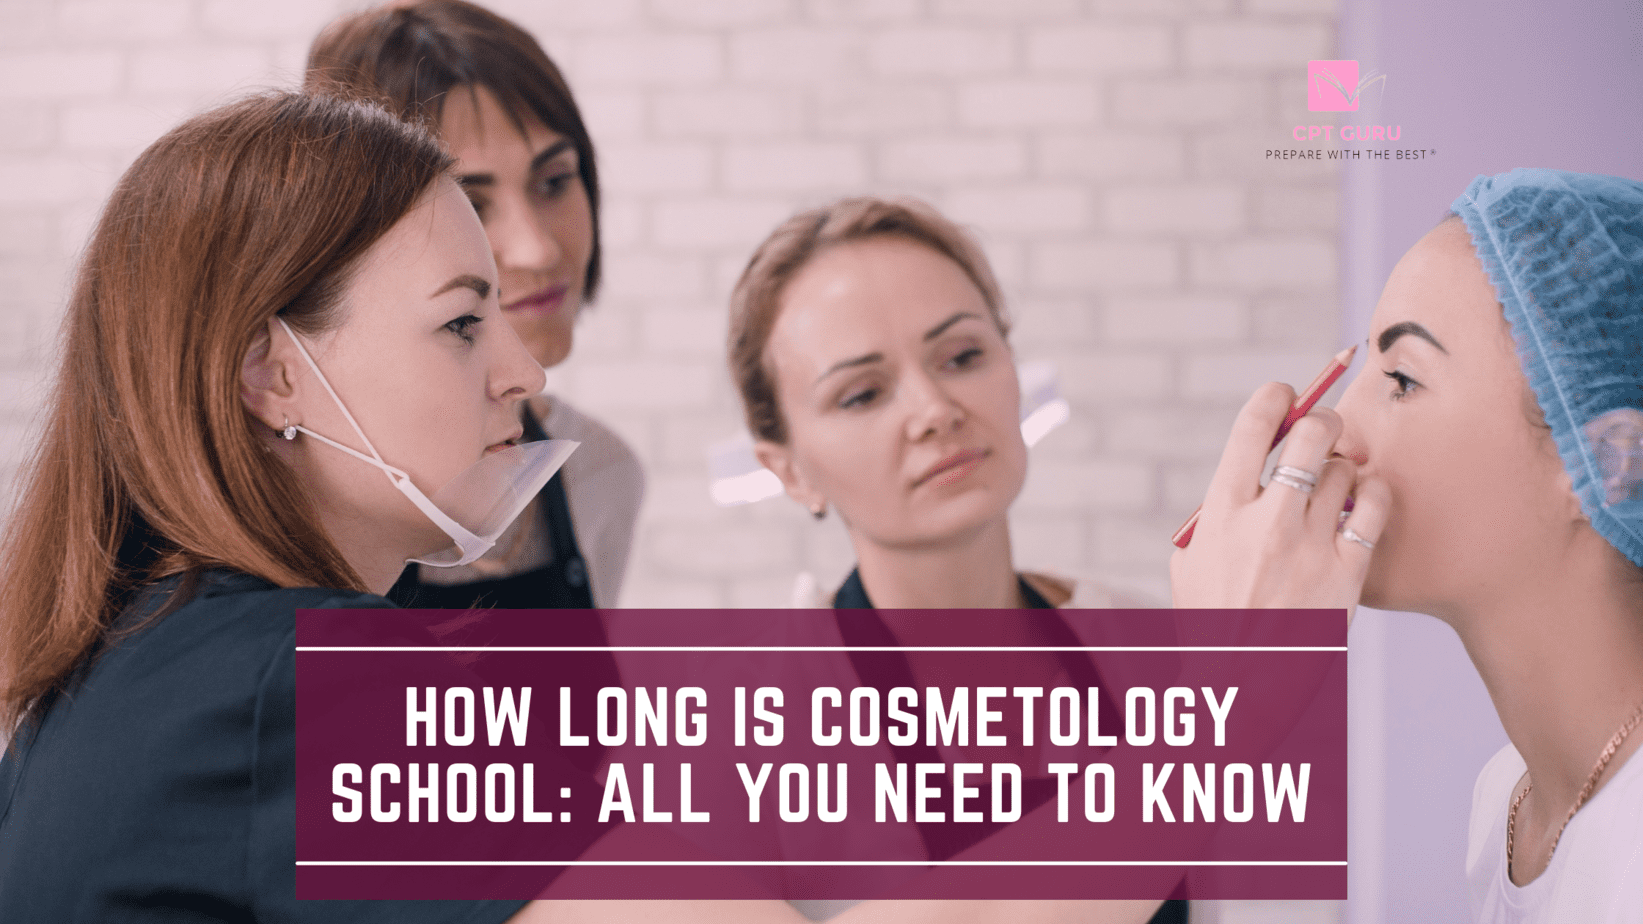 How Long is Cosmetology School: All You Need to Know